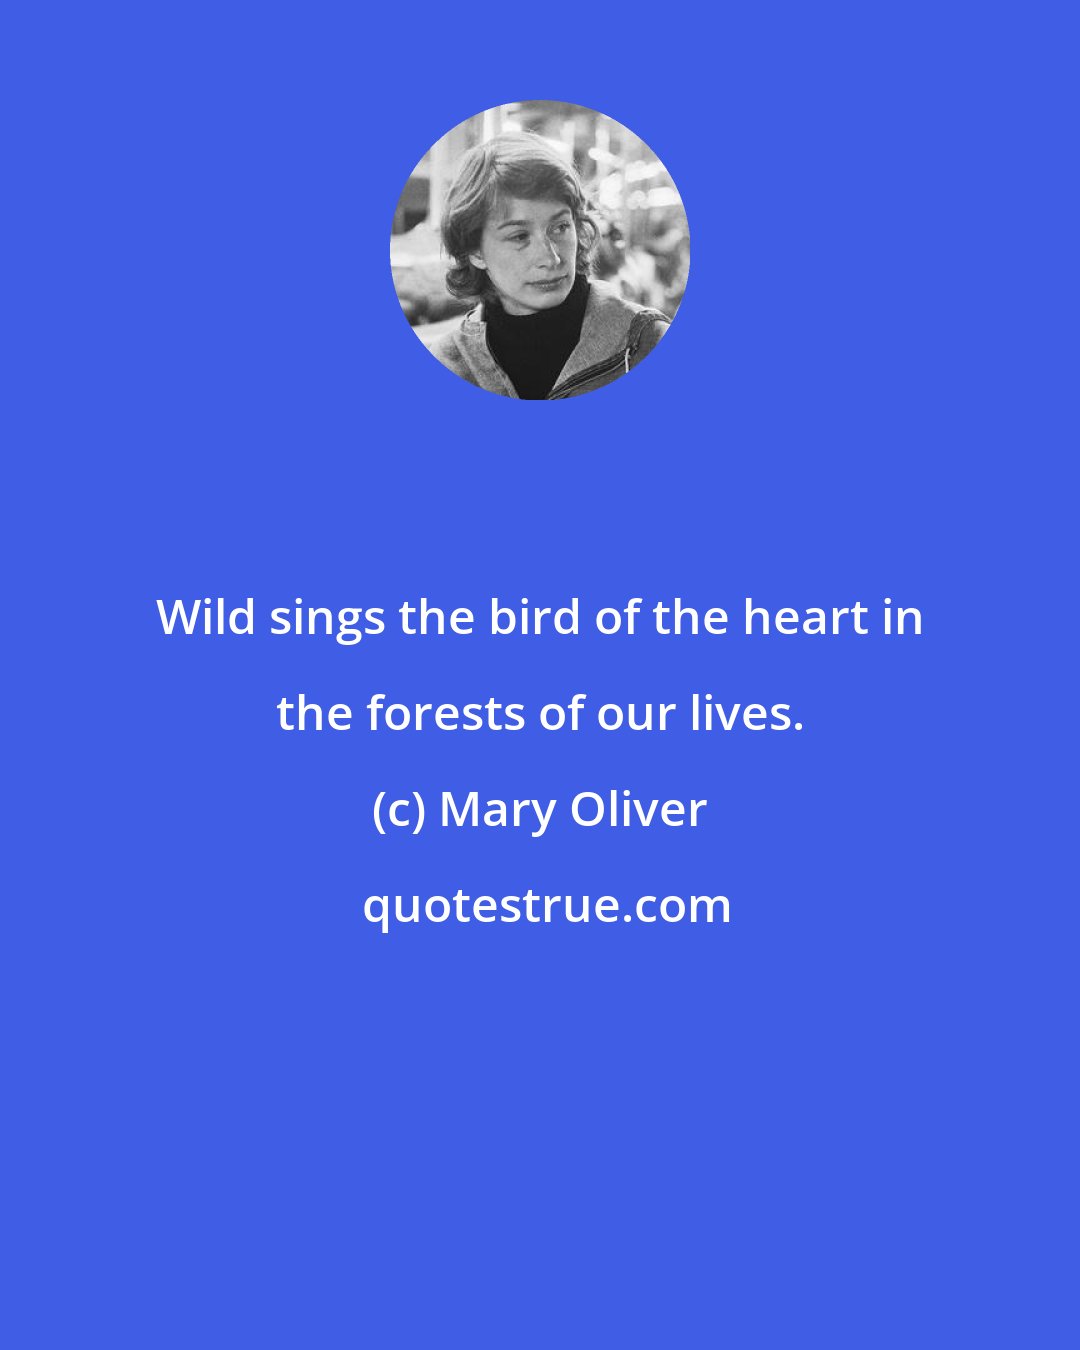 Mary Oliver: Wild sings the bird of the heart in the forests of our lives.